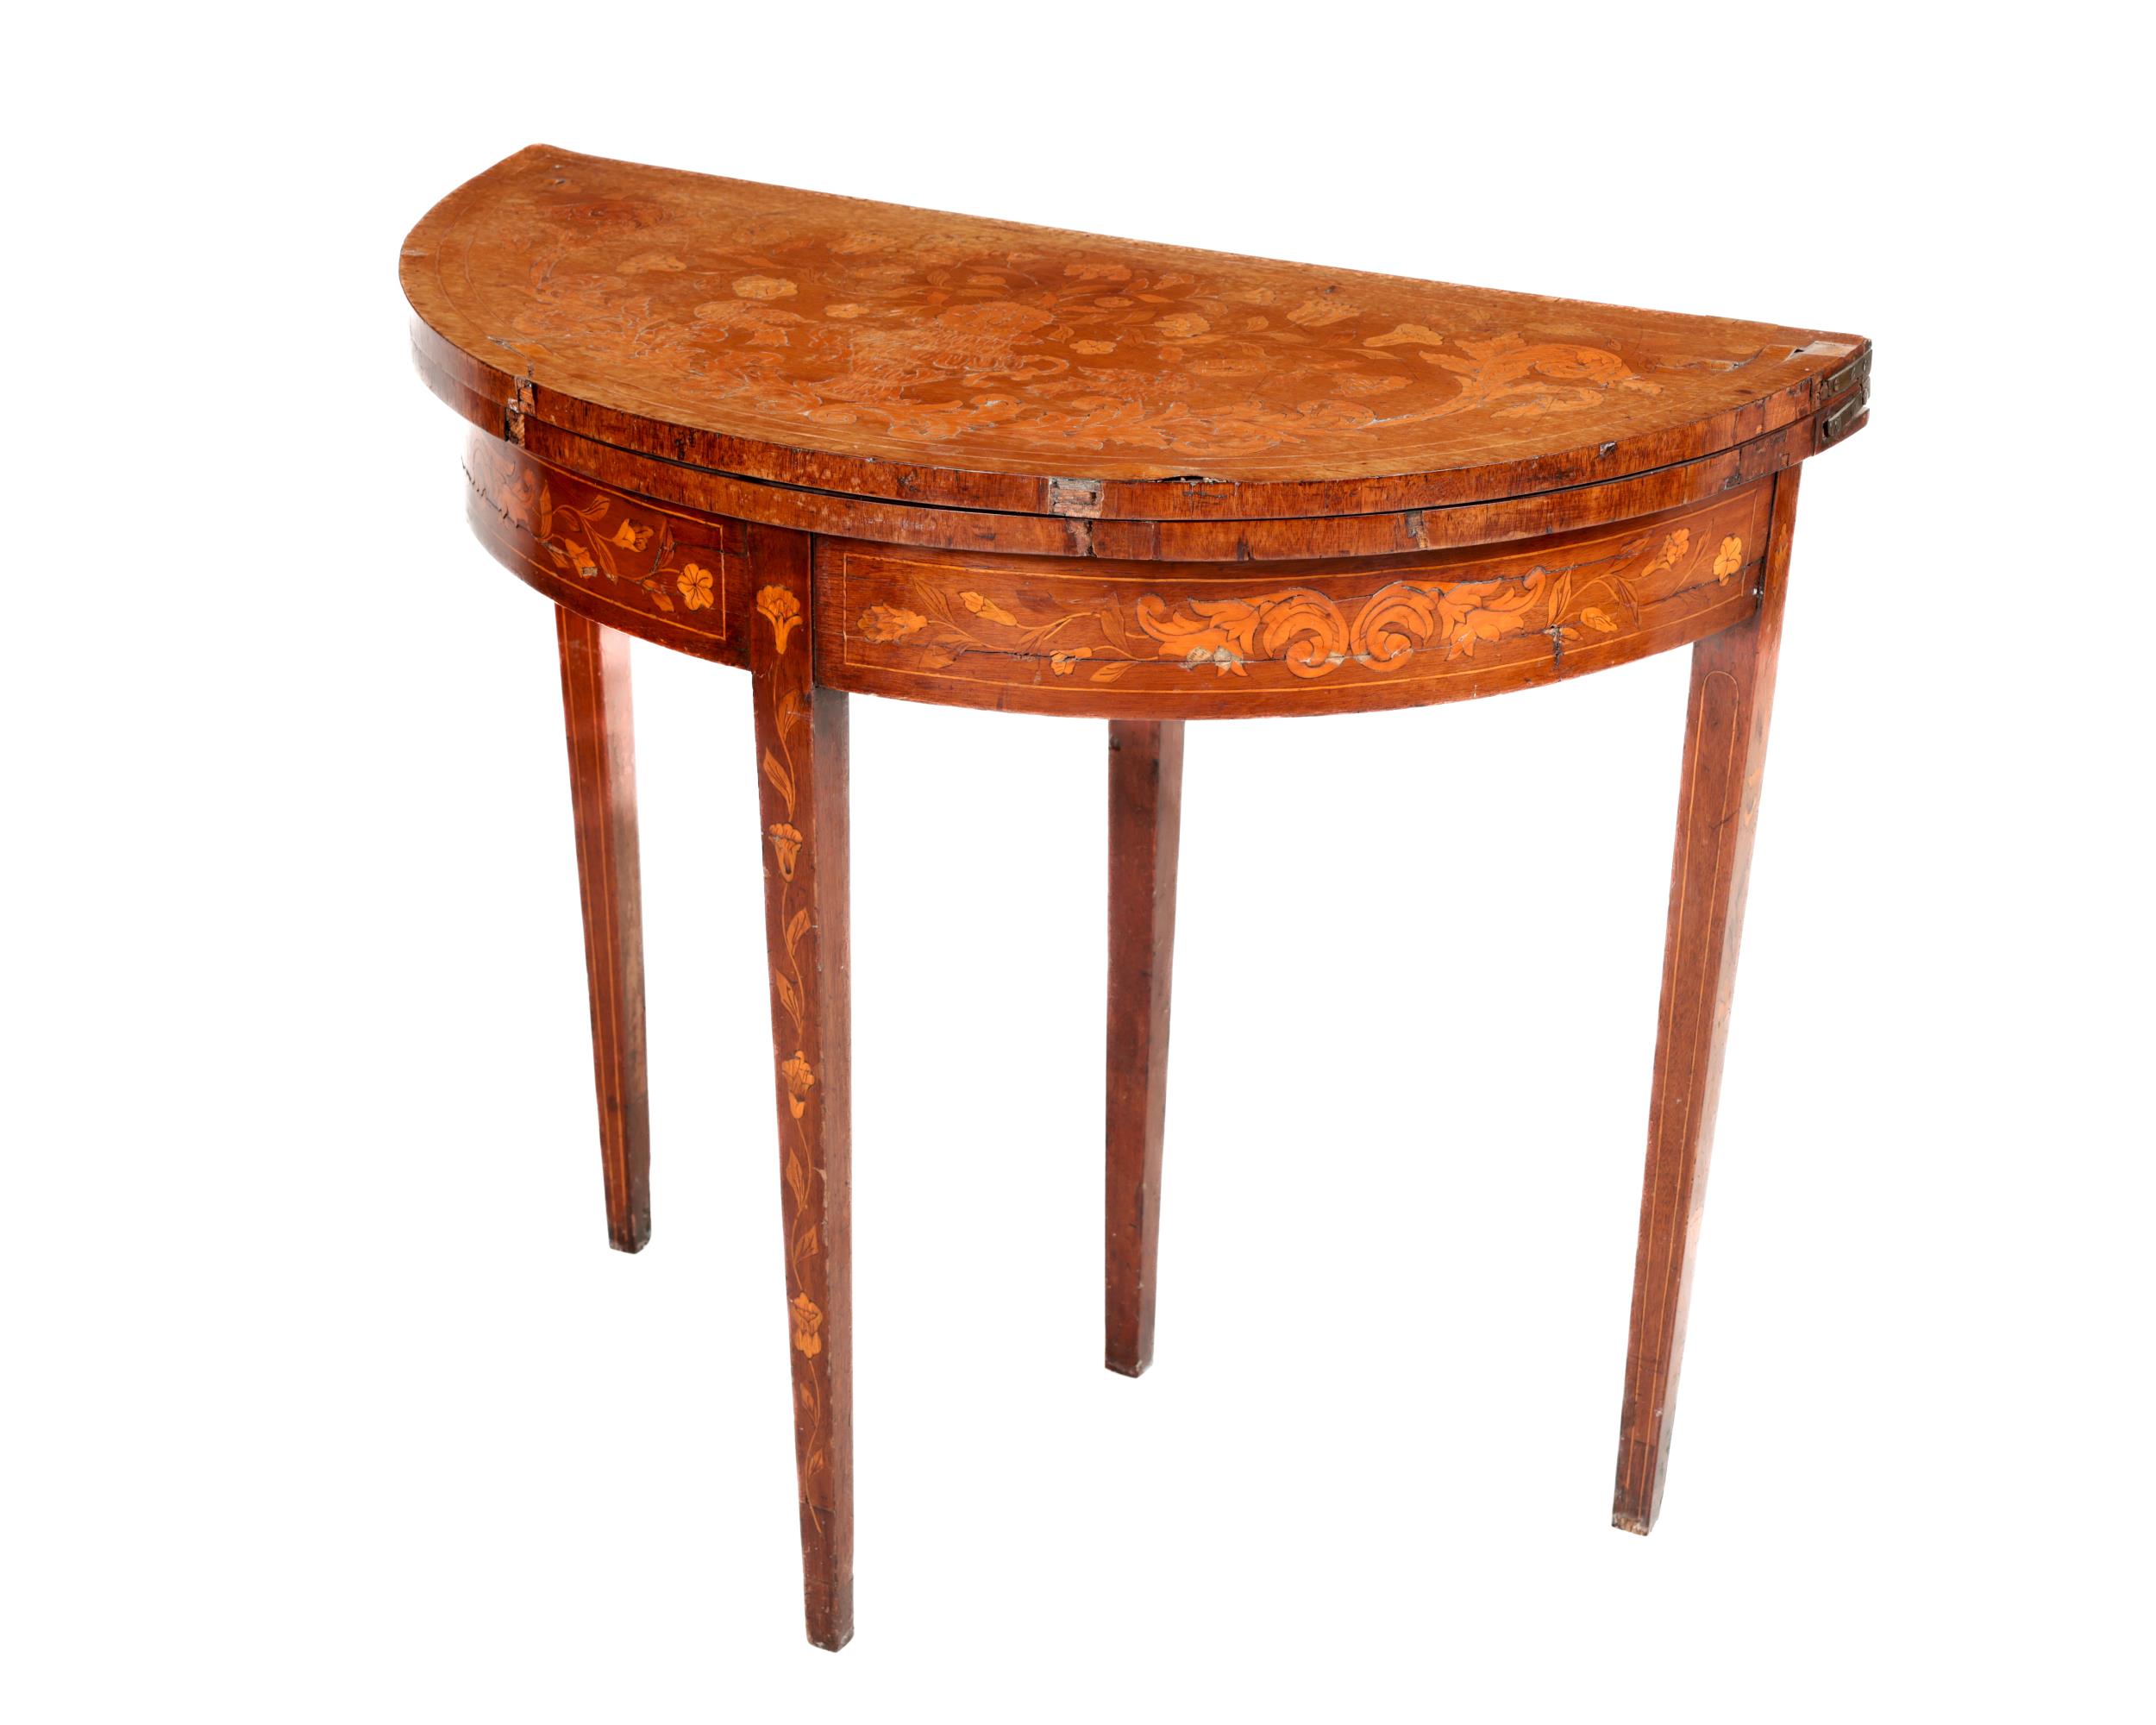 A 19th Century demi-lune mahogany Dutch marquetry fold-over Card Table, the top decorated with